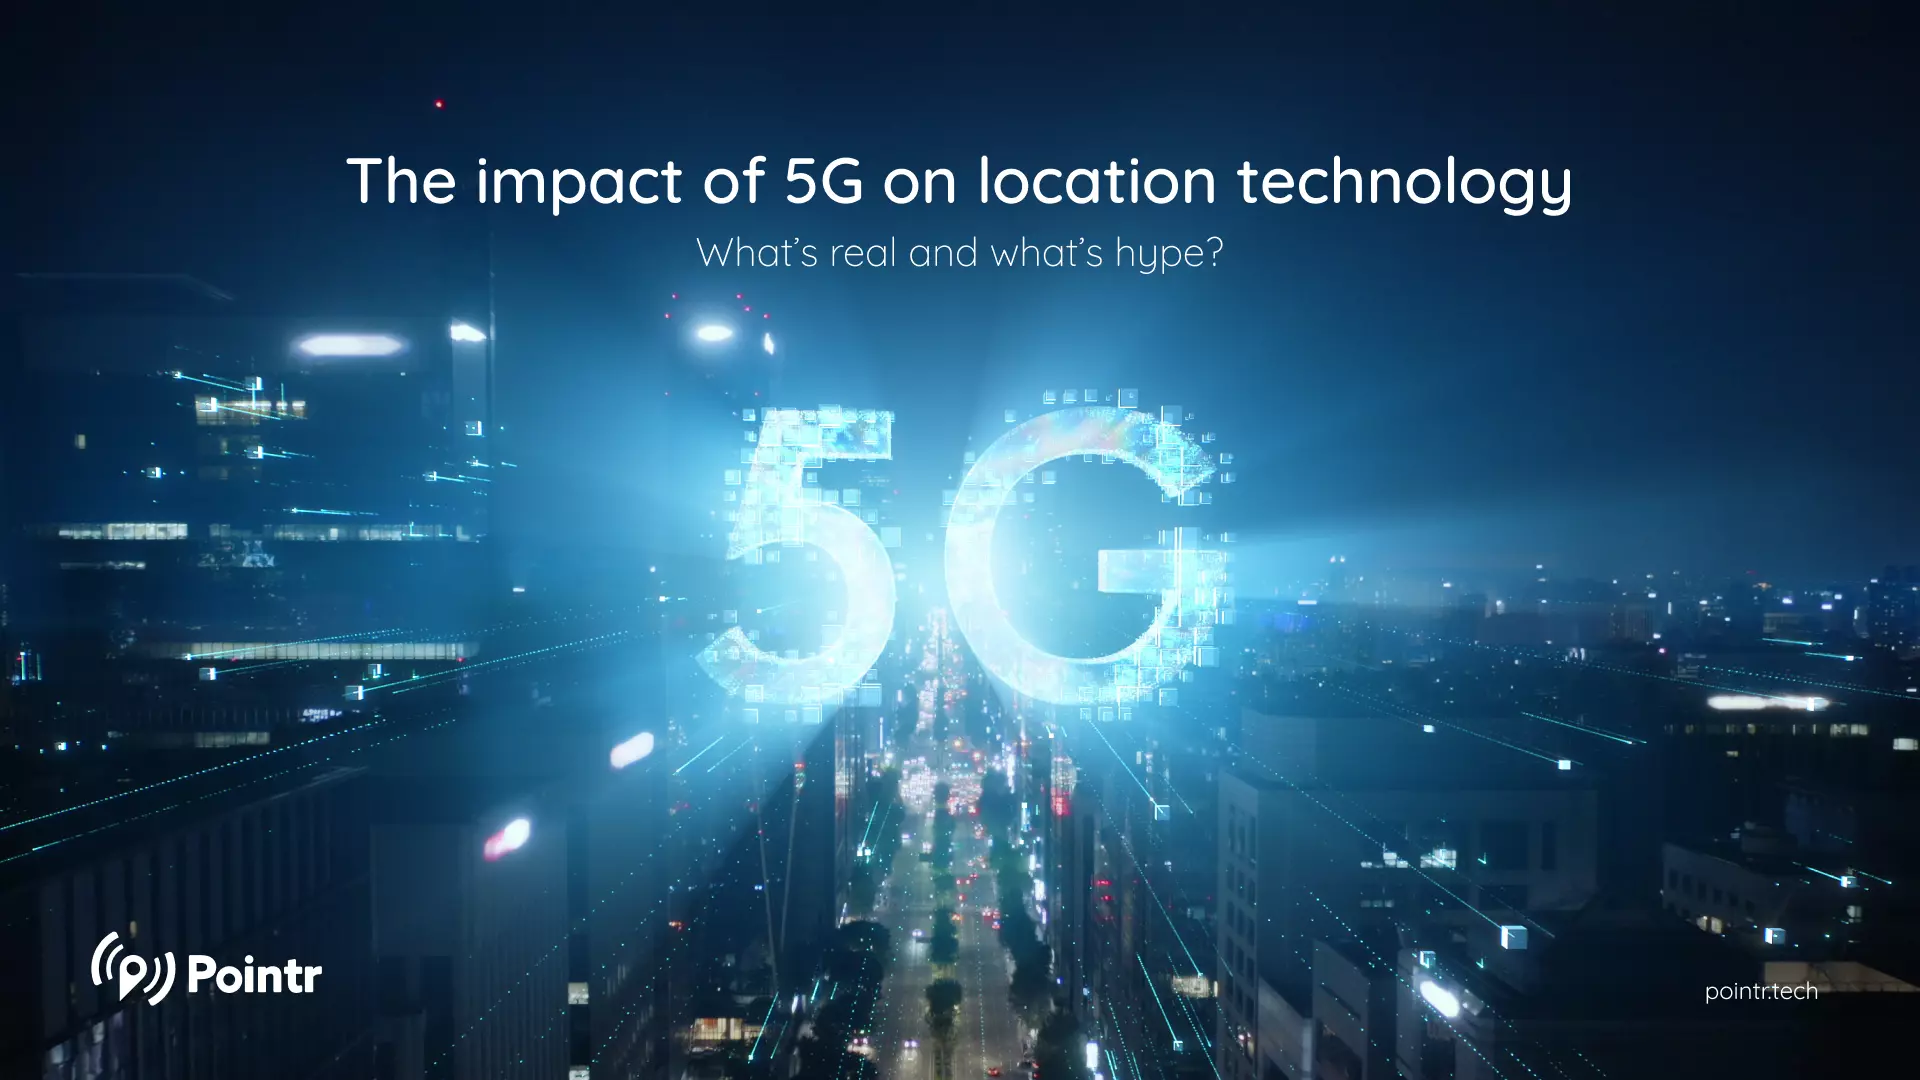 The impact of 5G on location technology: what’s real and what’s hype?